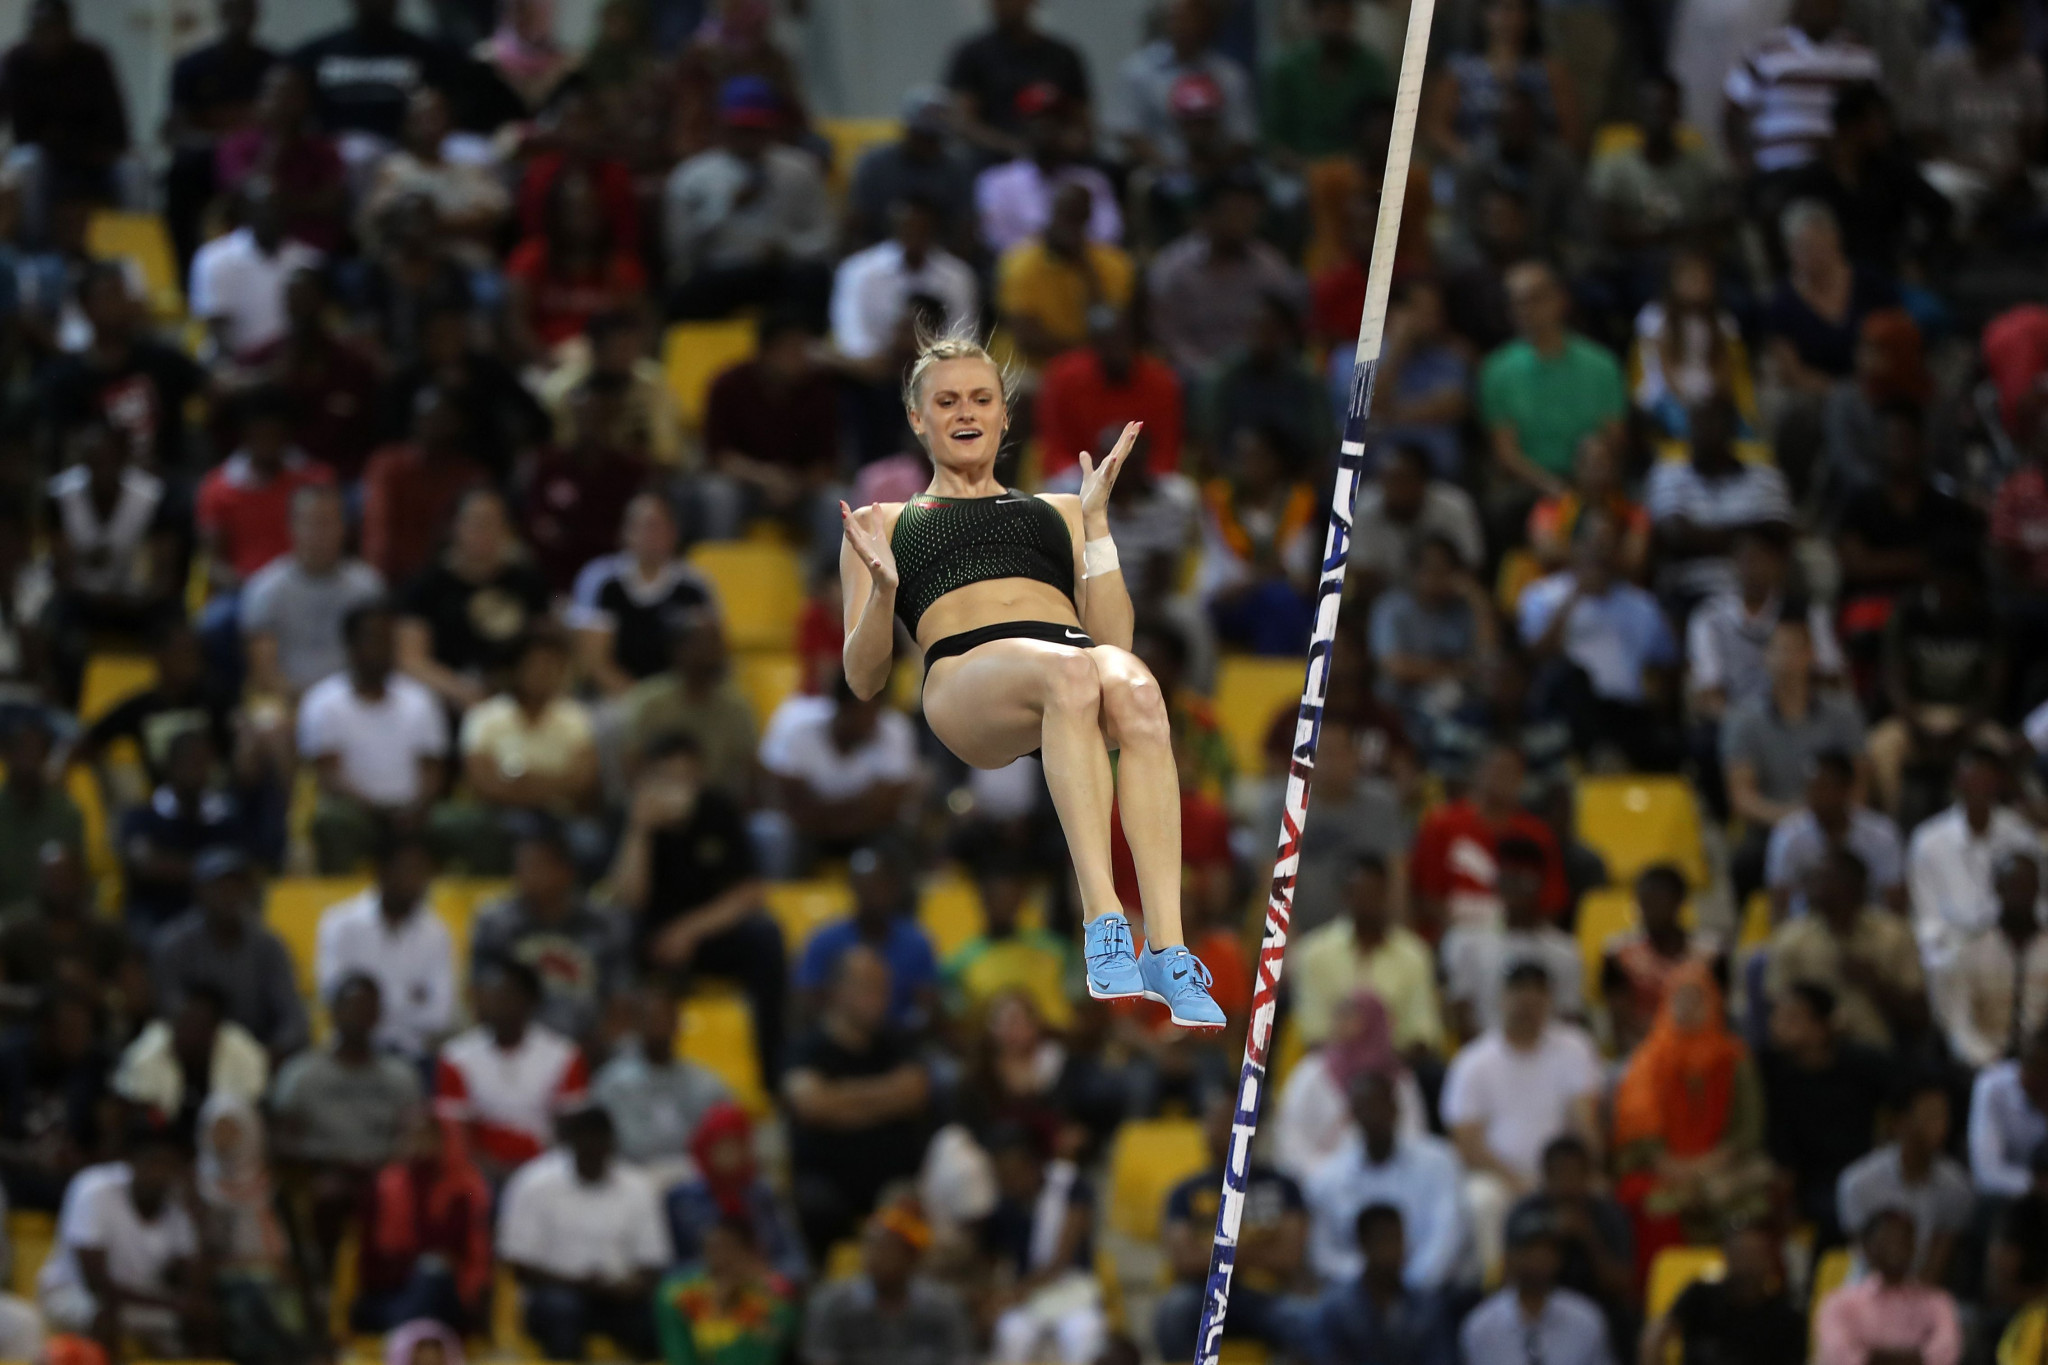 Nageotte trumps Olympic and world champion at IAAF World Indoor Tour in Boston